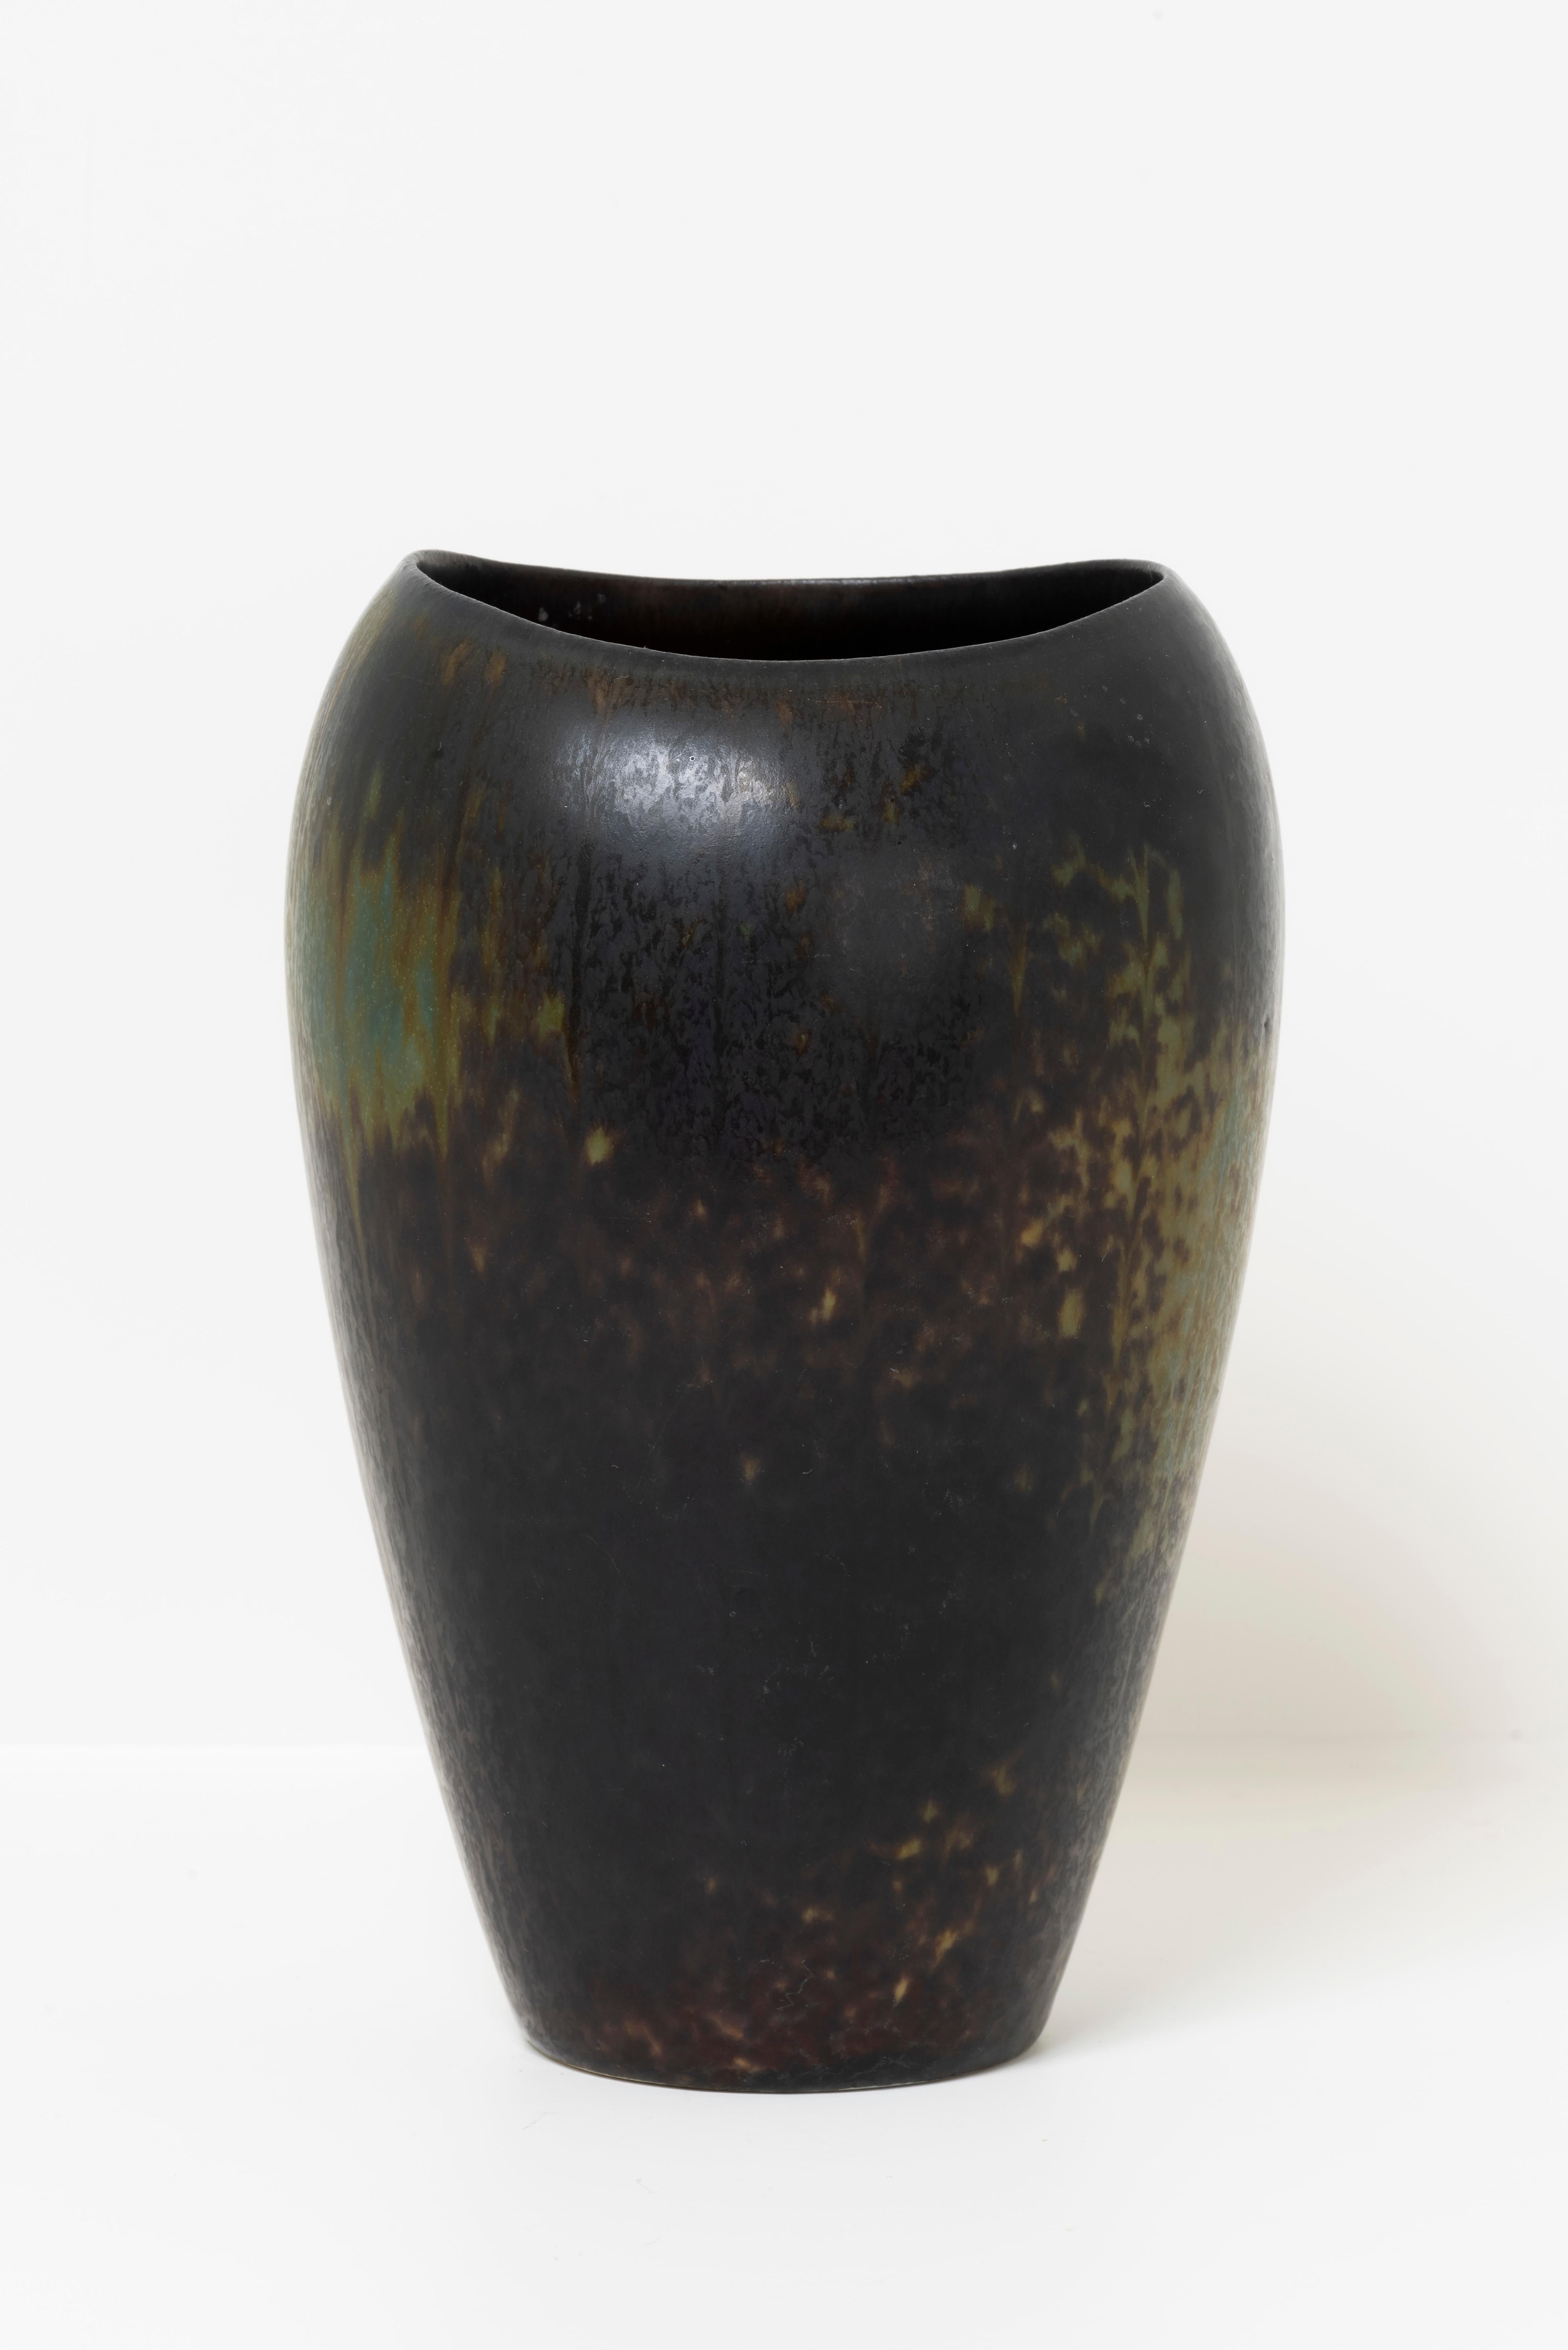 Gunnar Nylund was a Swedish ceramist whose artistic mark on the world of ceramics is undeniable. During the 1960s, Nylund created pieces that reflected his creative ingenuity and commitment to high-quality craftsmanship. 

Gunnar Nylund's stoneware